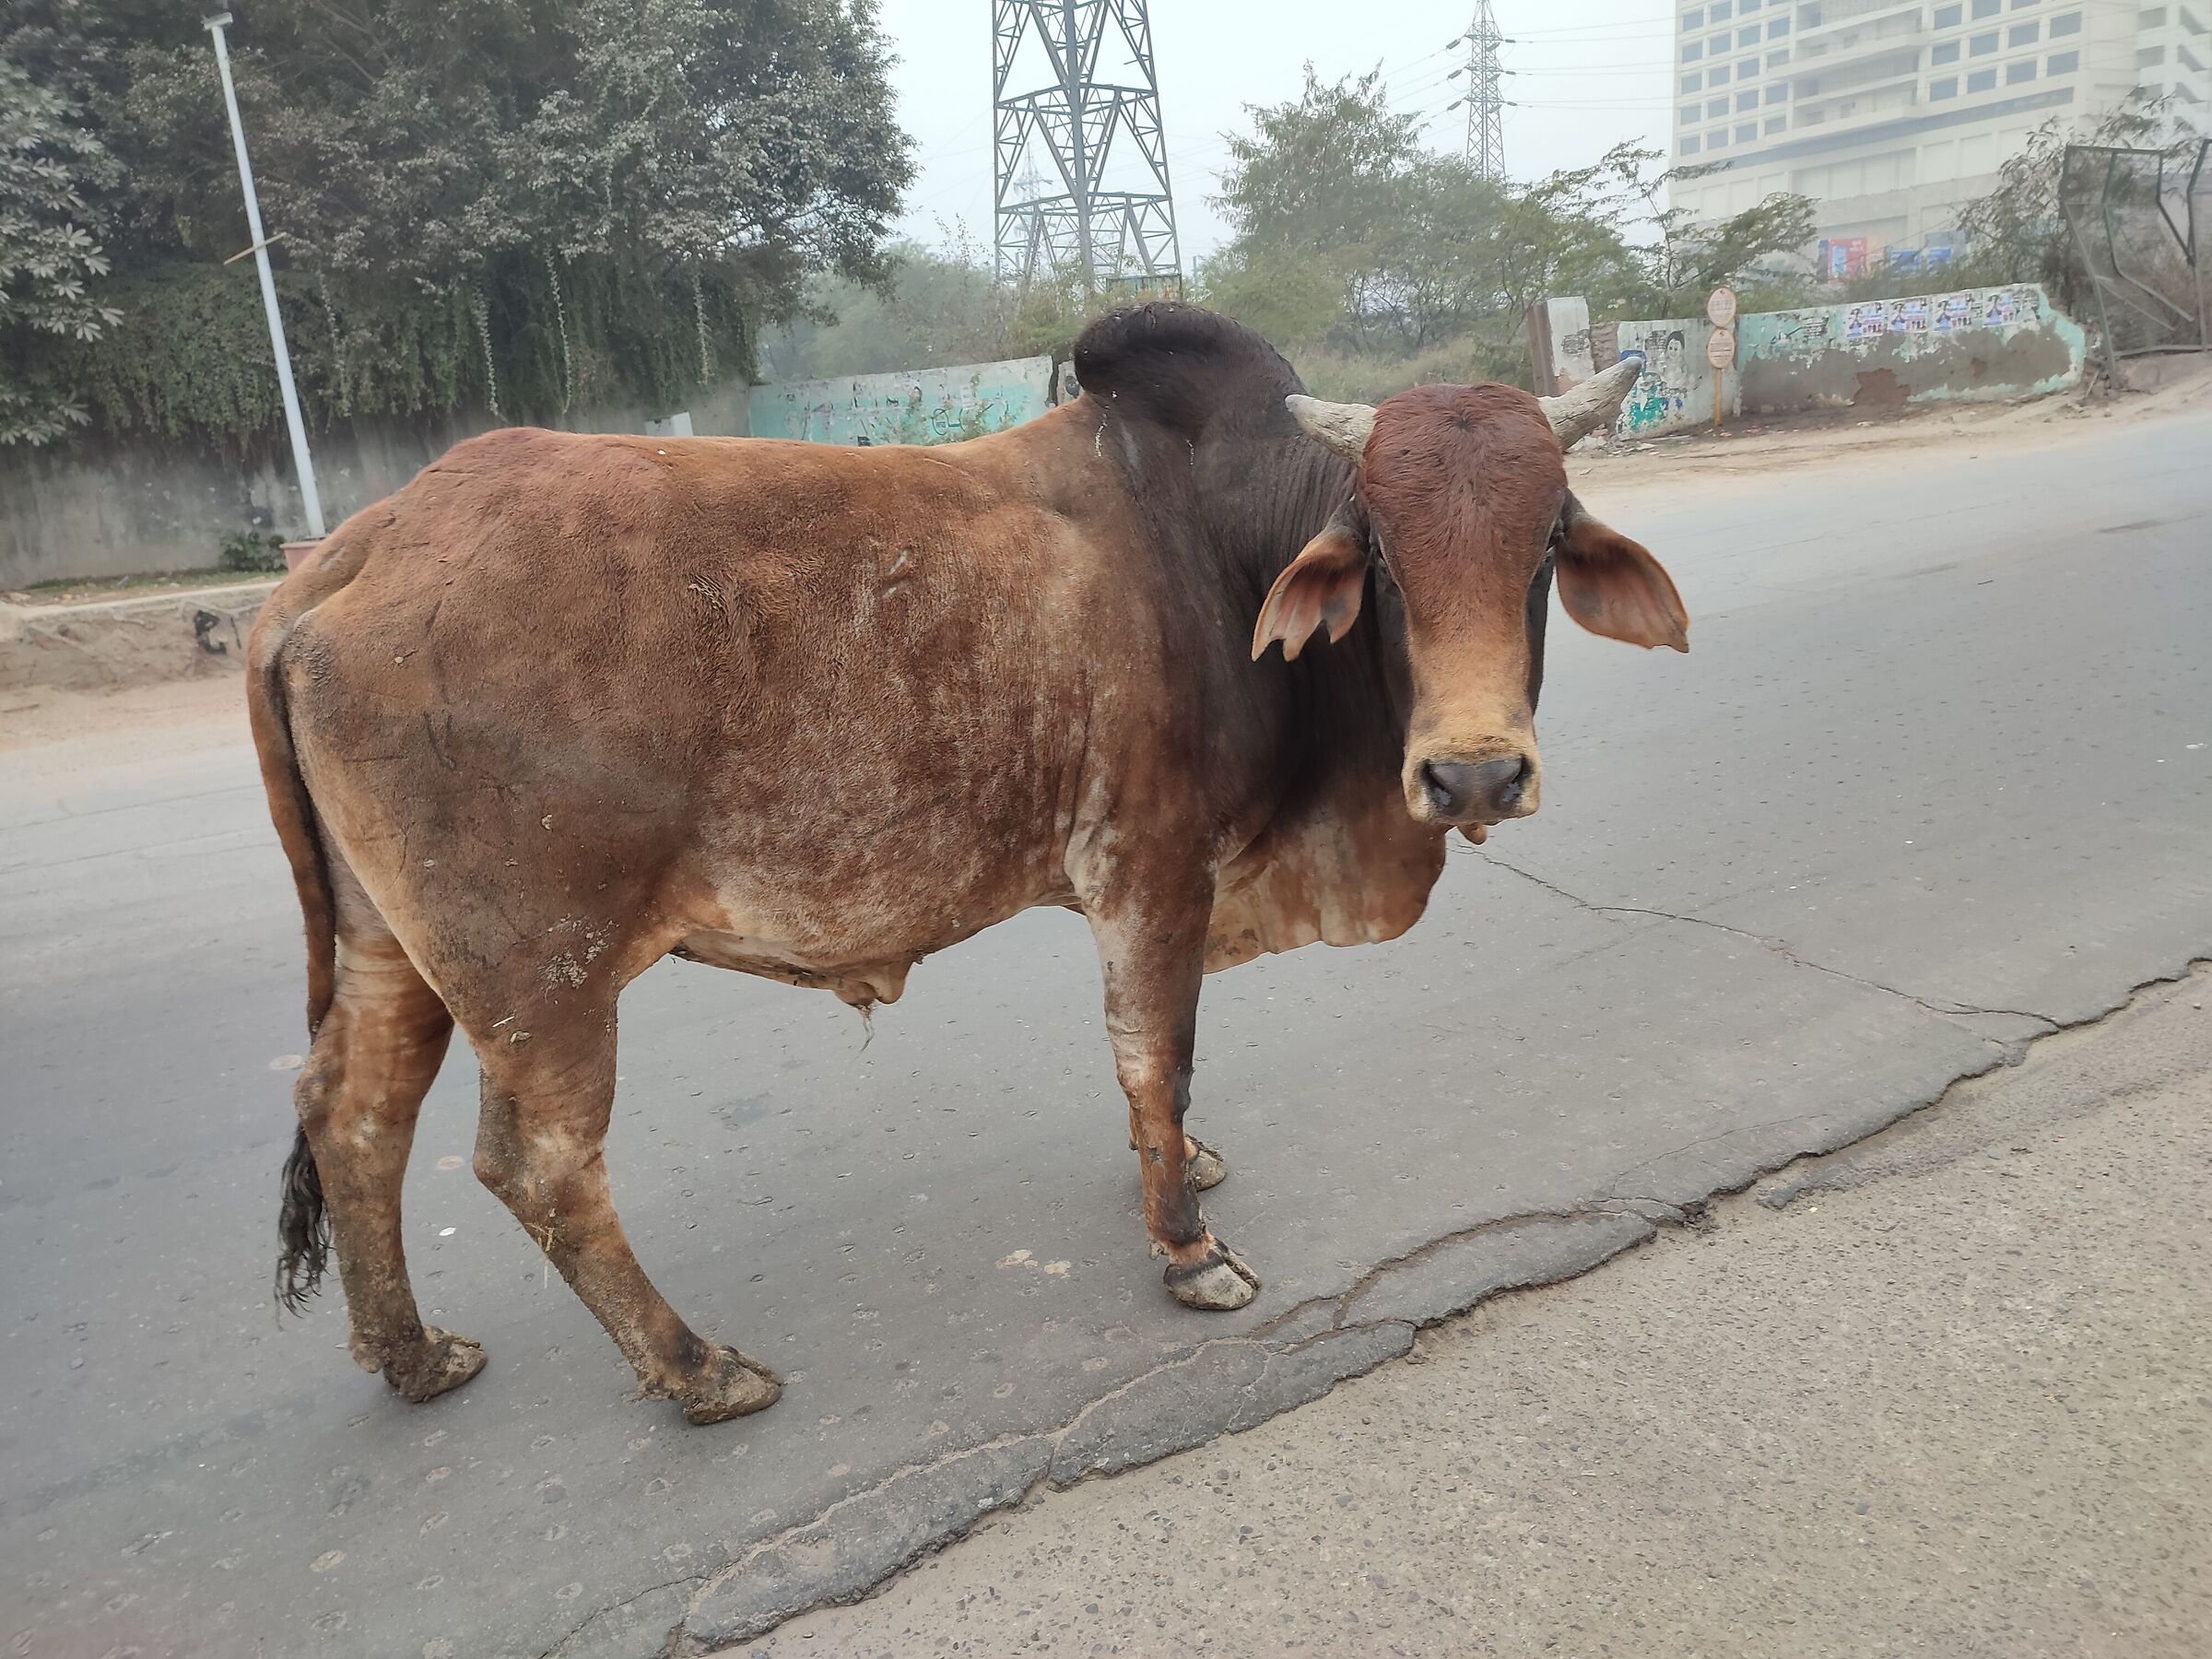 Cows in the street 3...